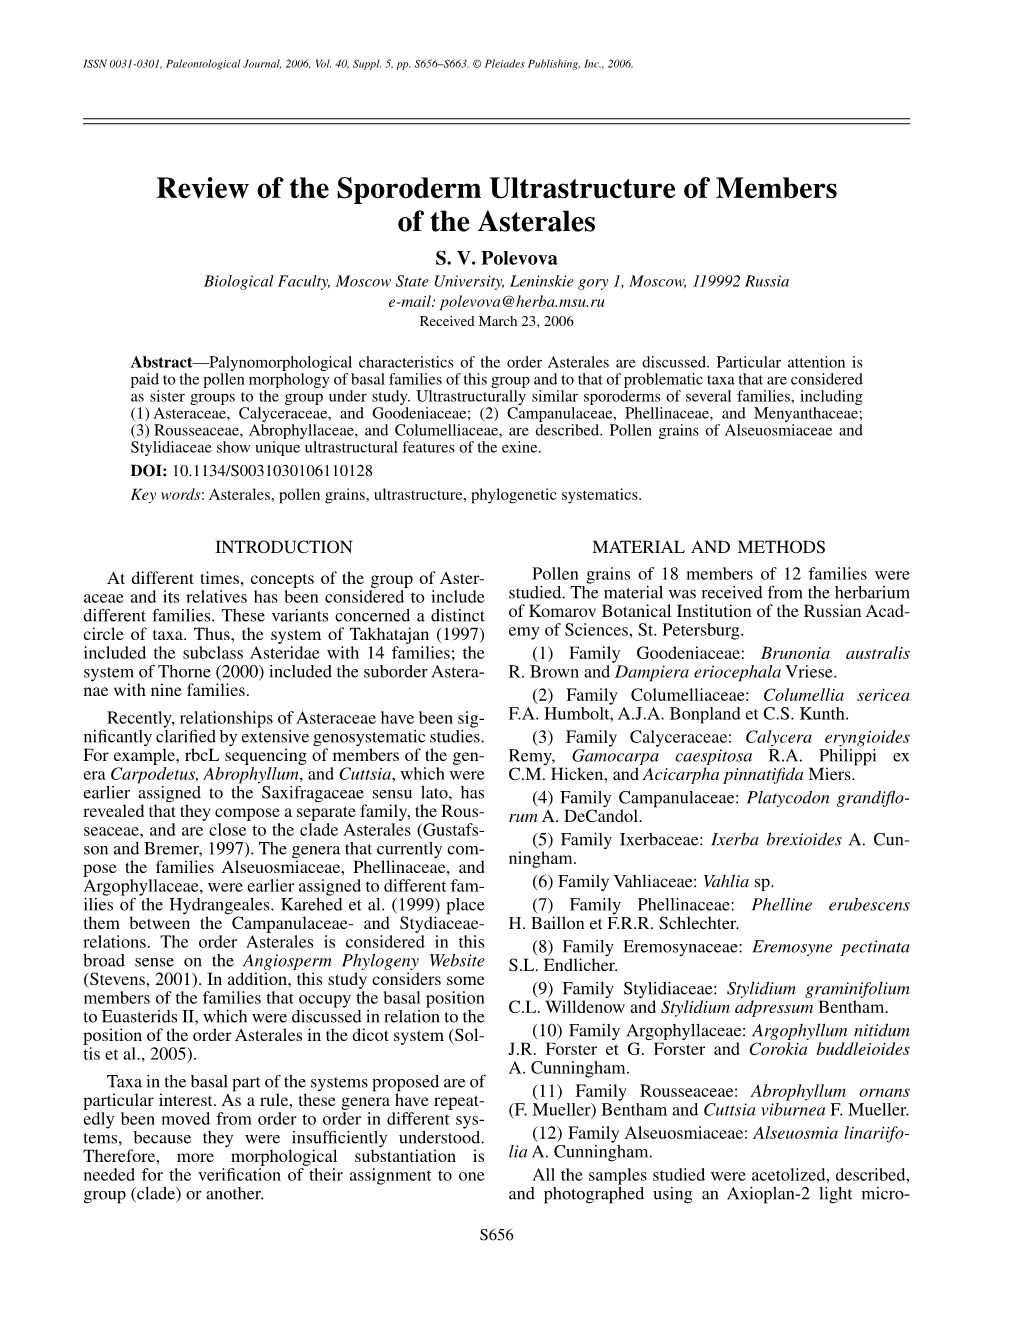 Review of the Sporoderm Ultrastructure of Members of the Asterales S